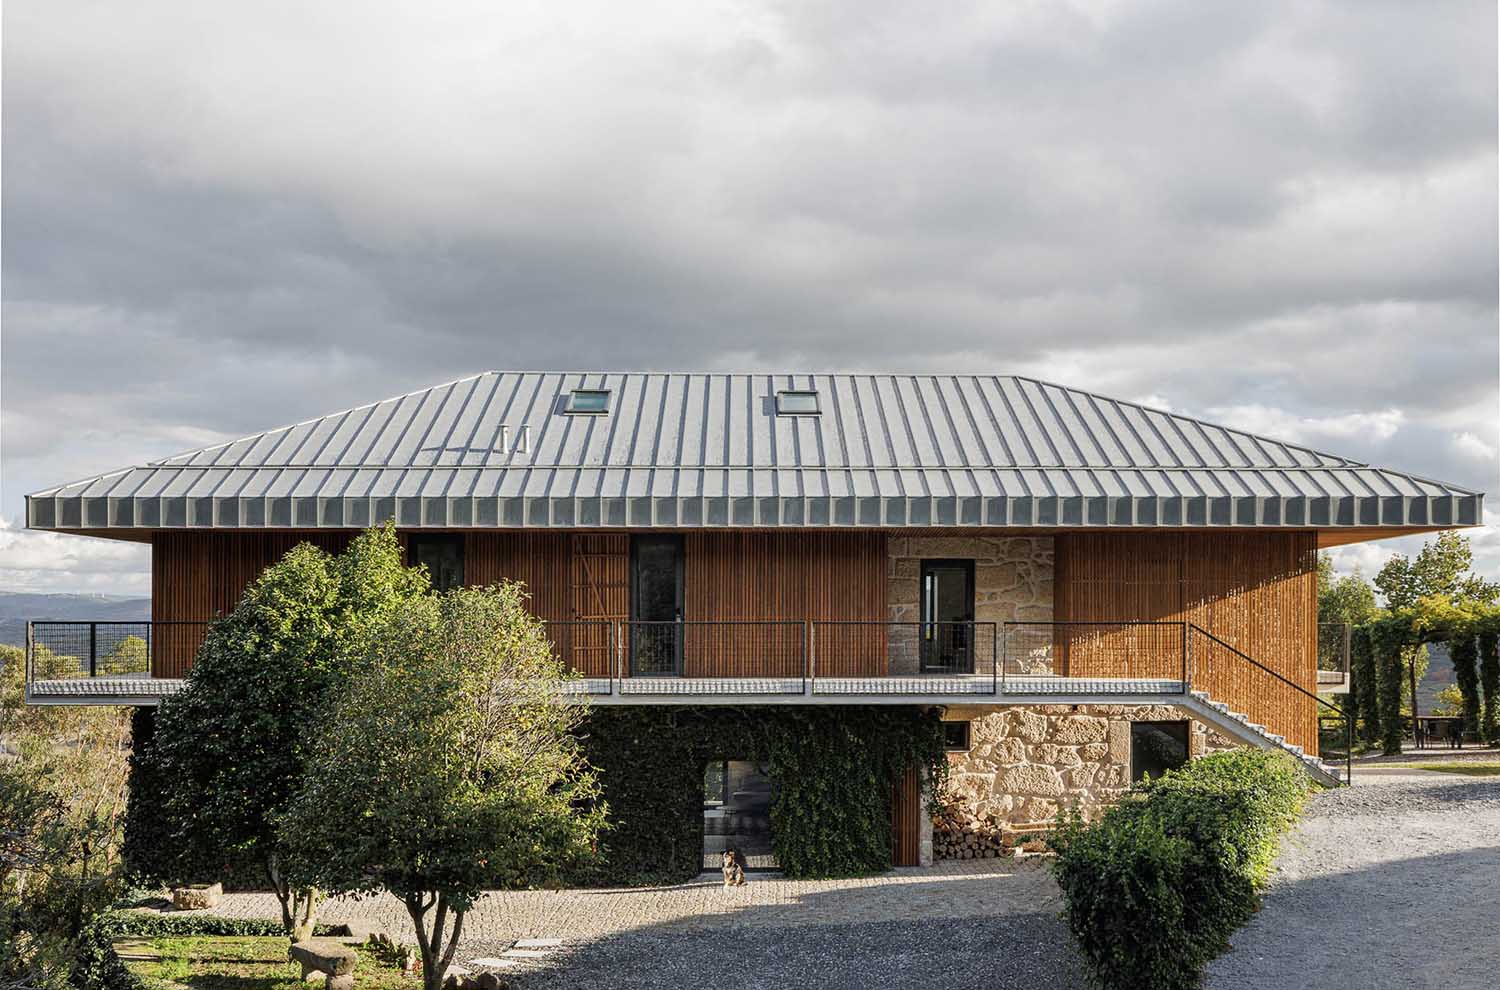 TheVagar Country House by David Bilo and Filipe Pina